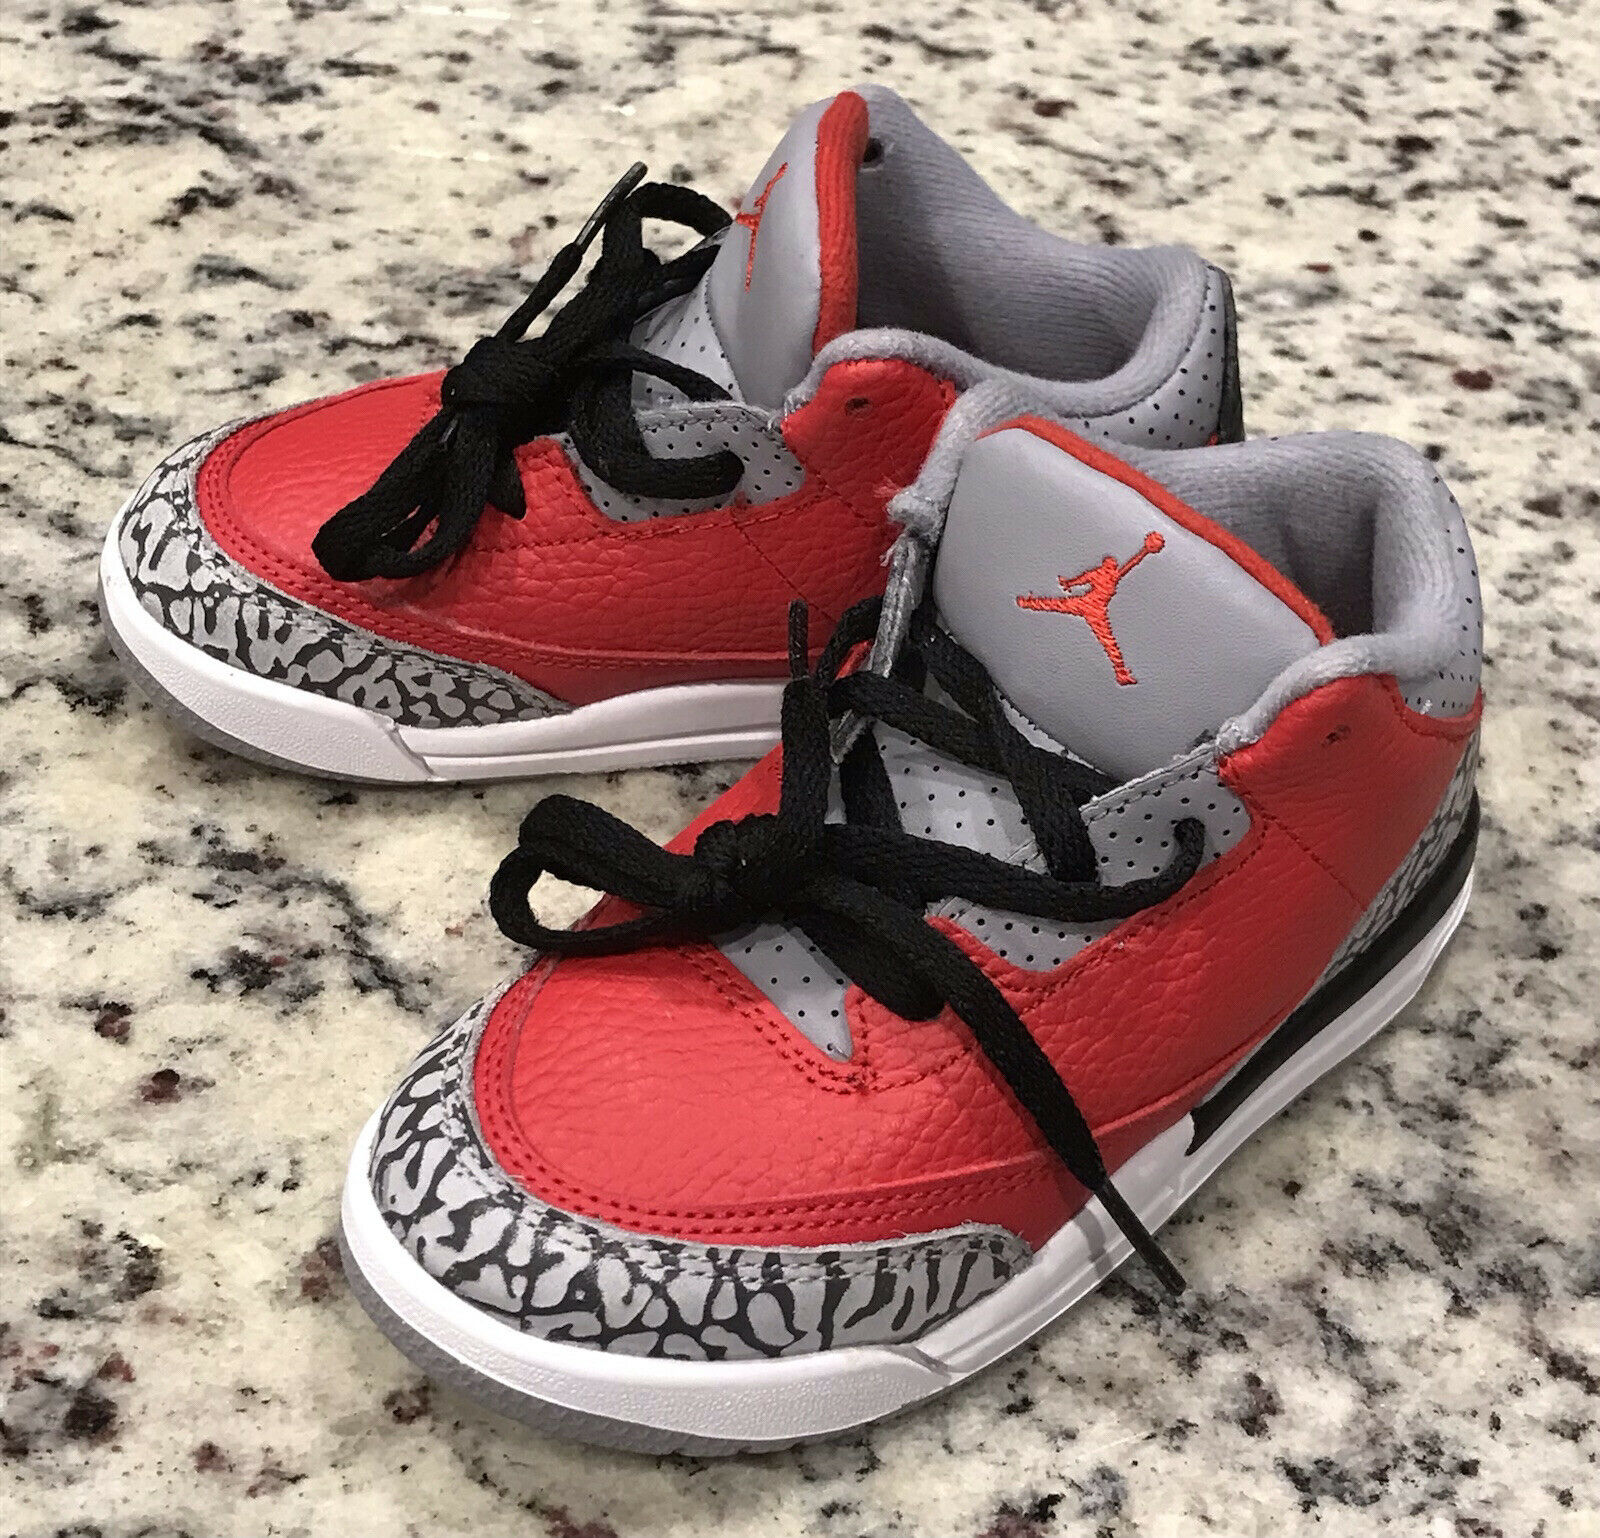 Nike Air Jordan 3 Retro Fire Red Cement Shoes Toddler 2019 Size 10C